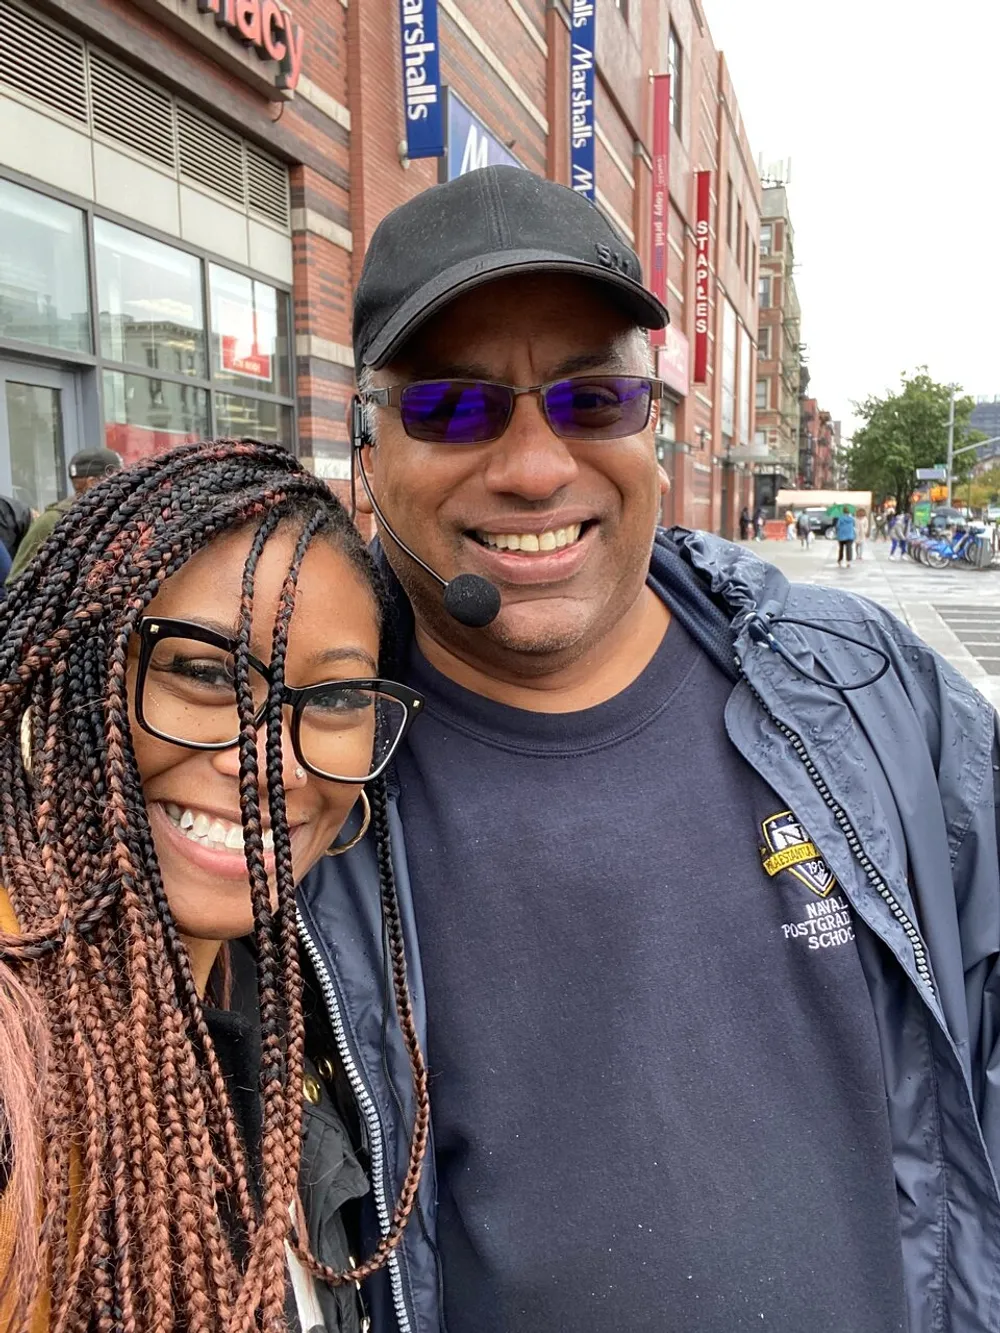 A woman and a man with a headset are smiling for a selfie on a city street with commercial buildings in the background